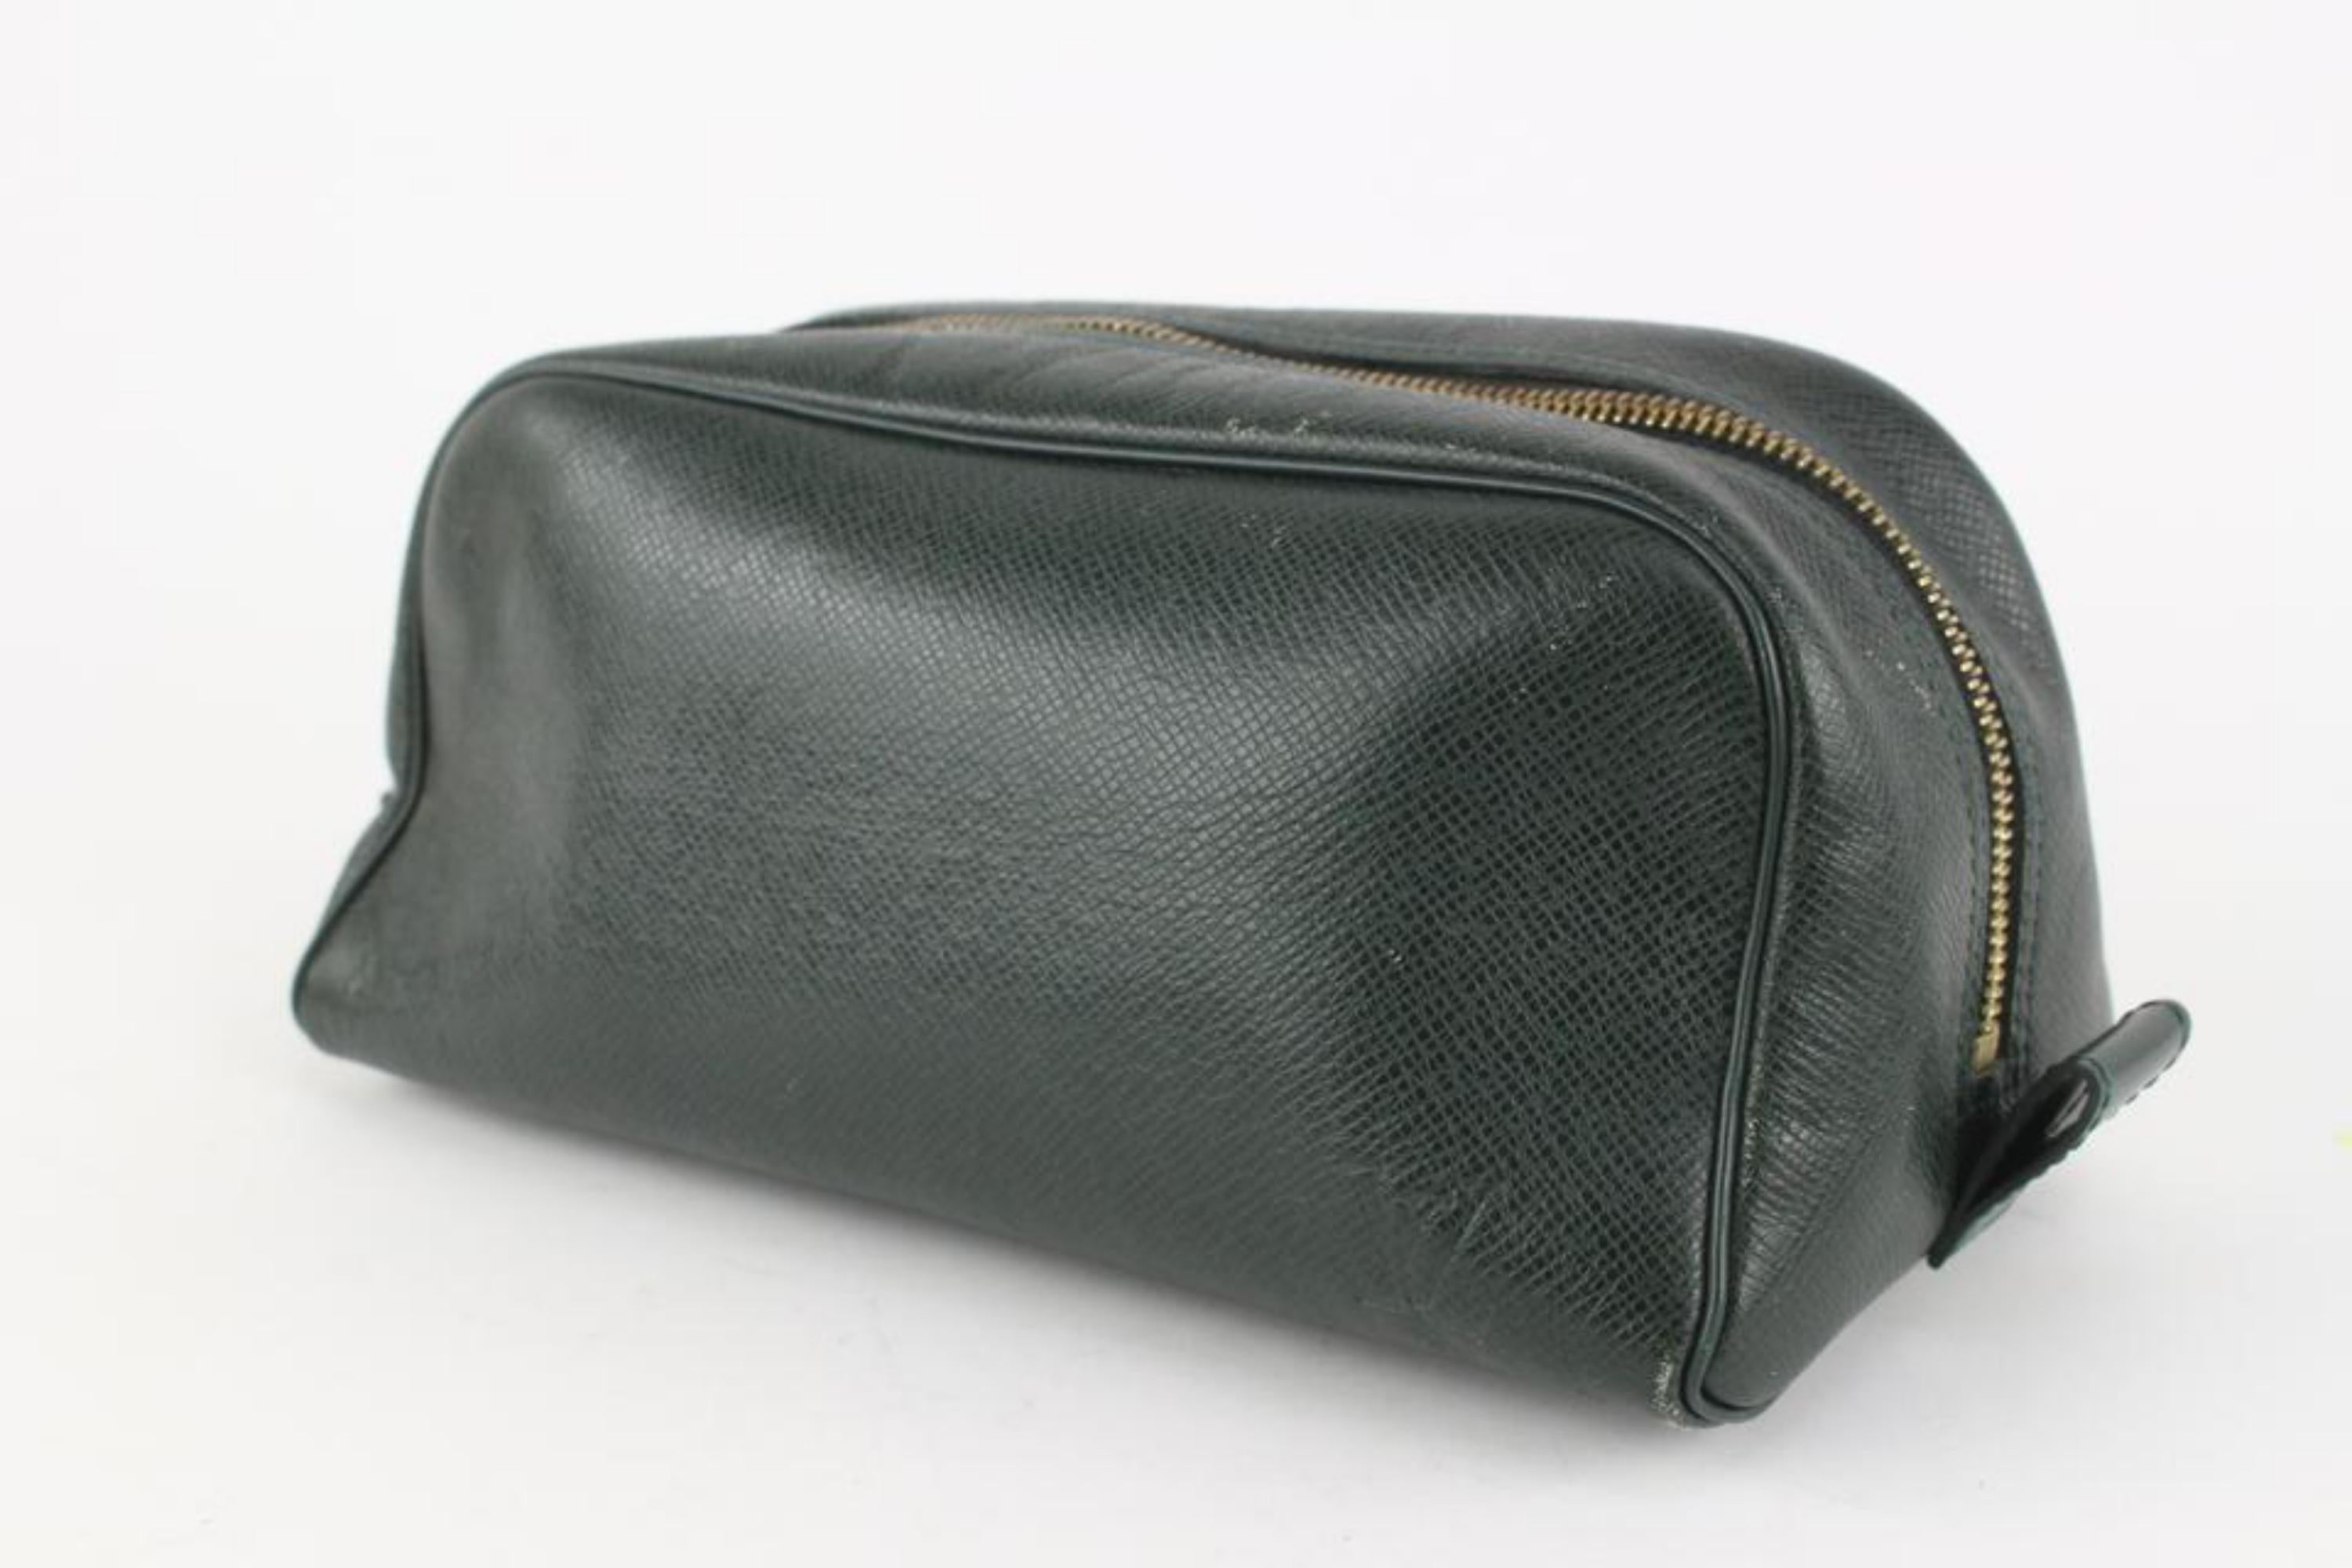 Louis Vuitton Green Taiga Leather Trousse Cosmetic Pouch Toiletry Case 1210lv40 6